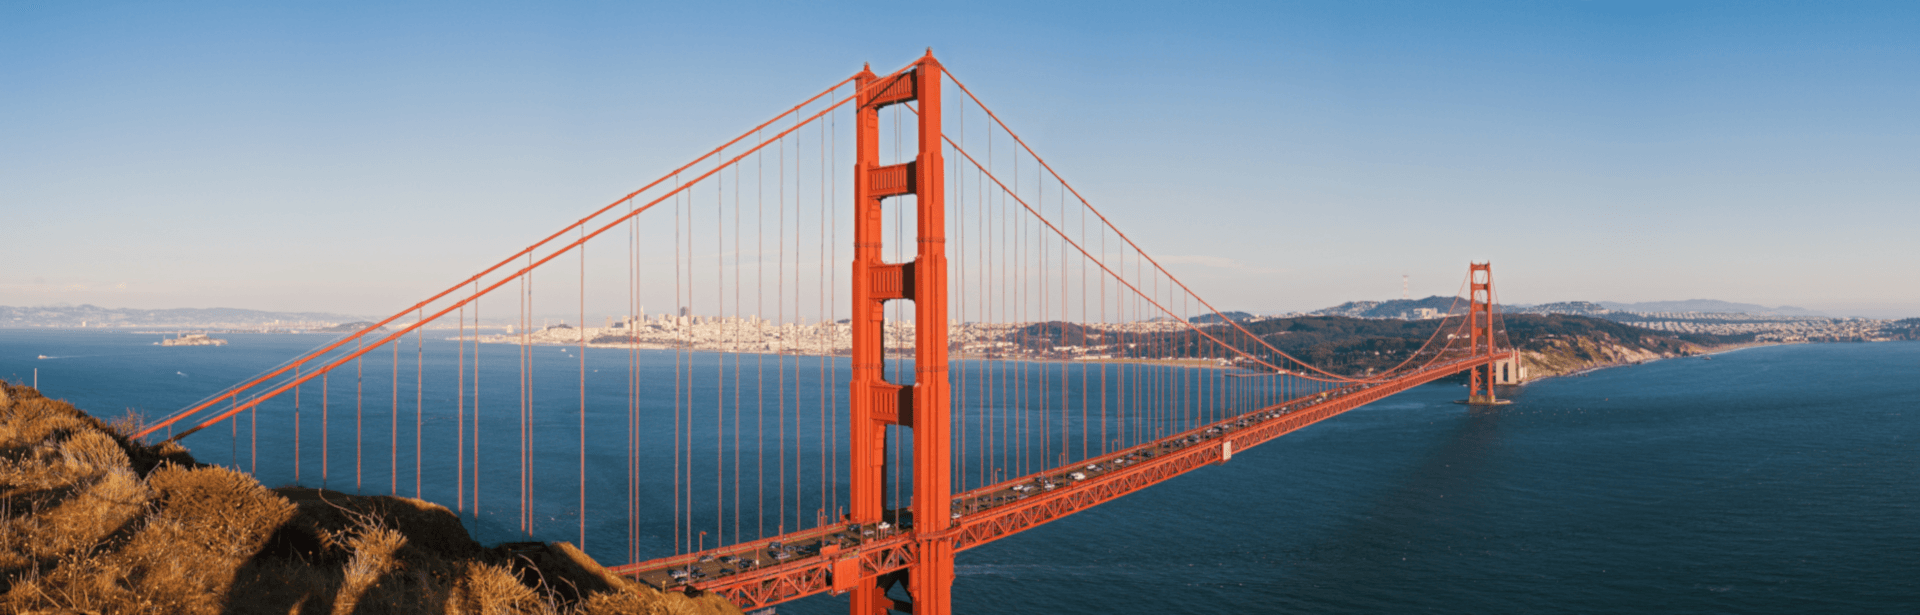 The Golden Gate Bridge on a clear day with San Francisco in the background.